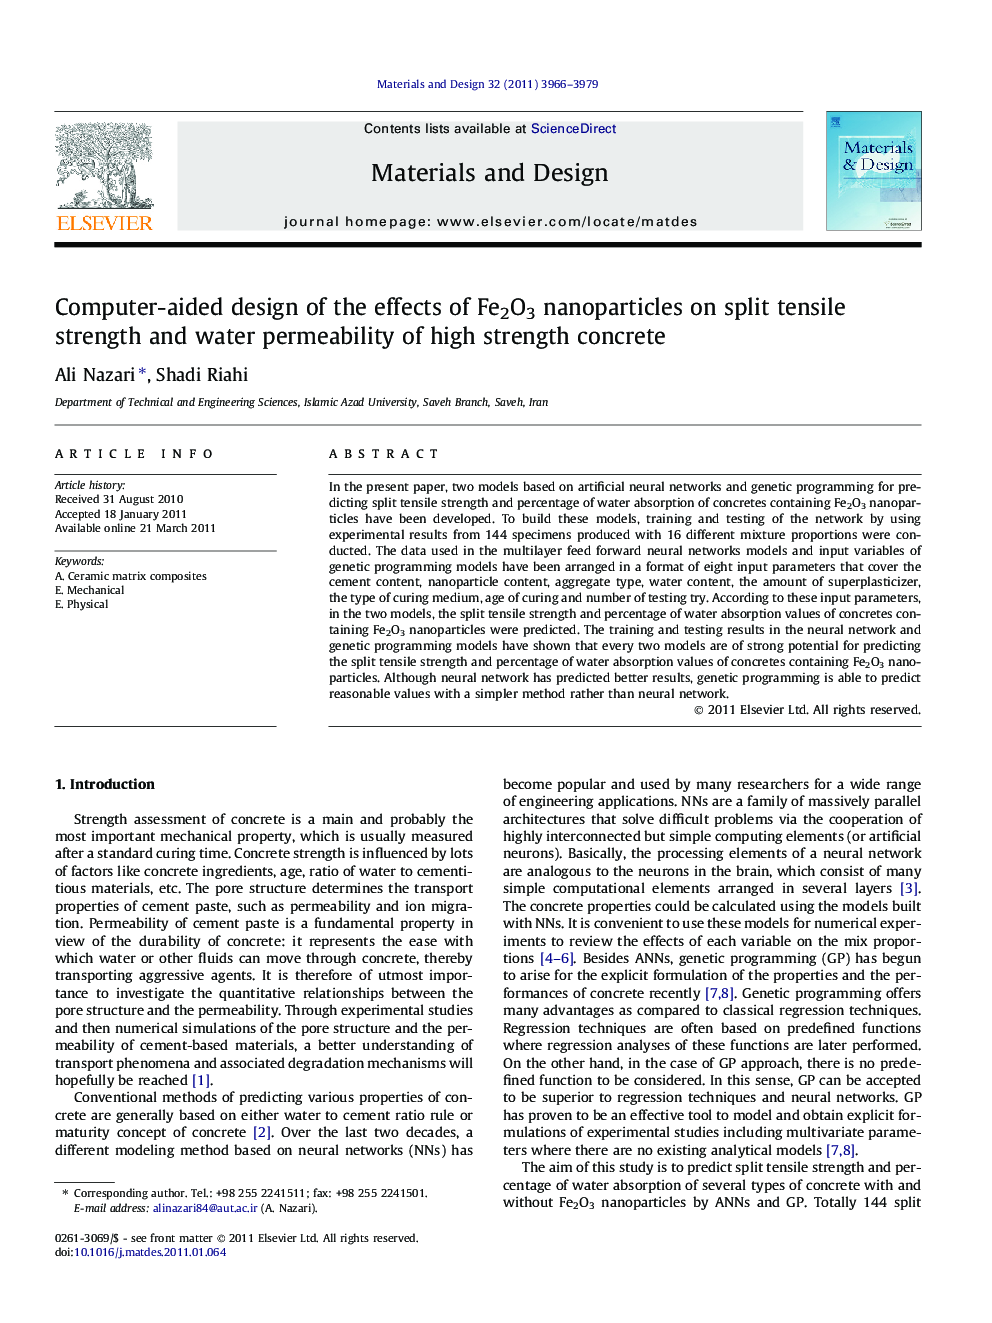 Computer-aided design of the effects of Fe2O3 nanoparticles on split tensile strength and water permeability of high strength concrete